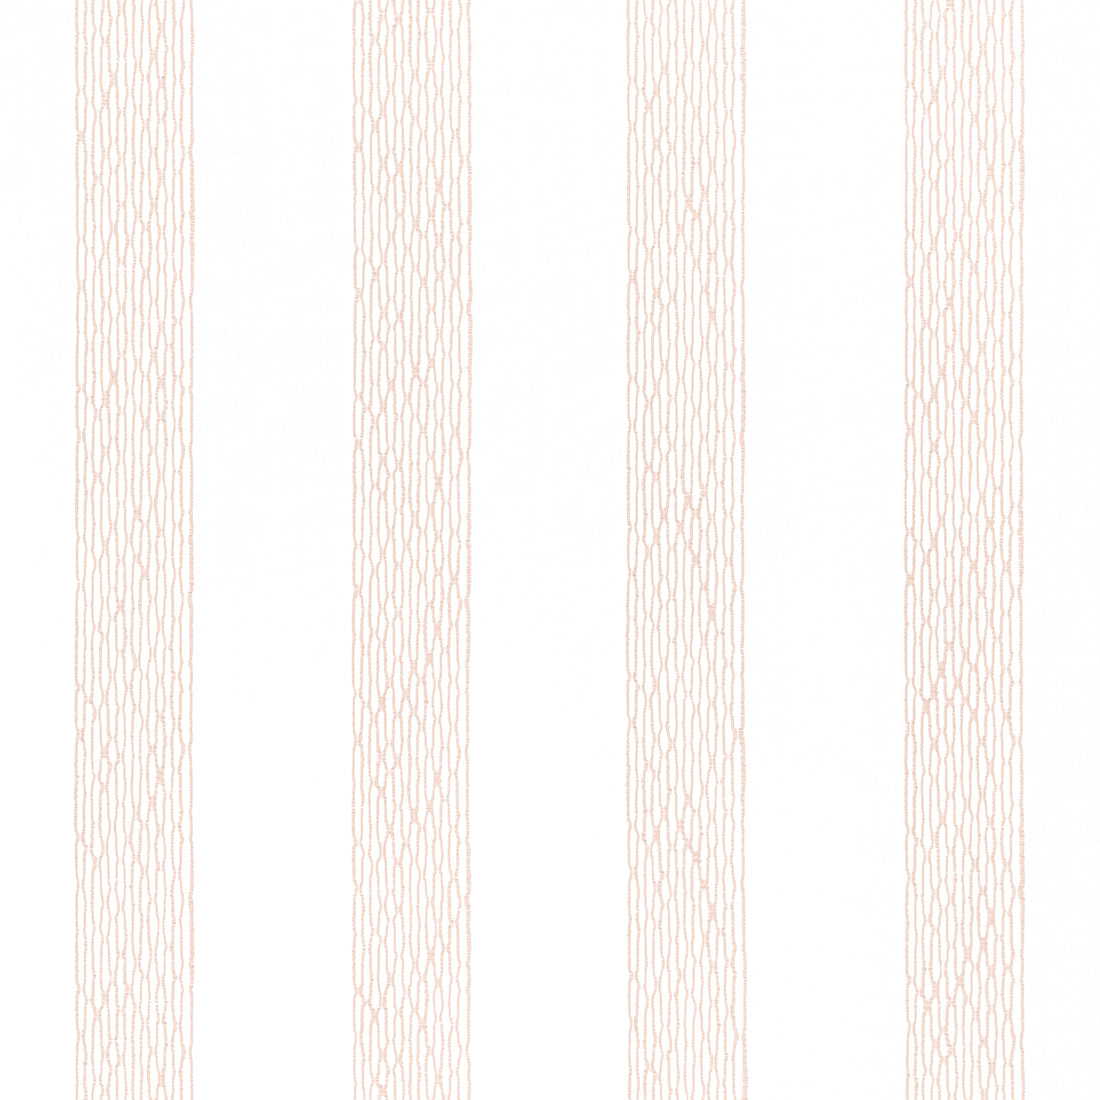 Cypress Stripe fabric in clay color - pattern number FWW8265 - by Thibaut in the Aura collection